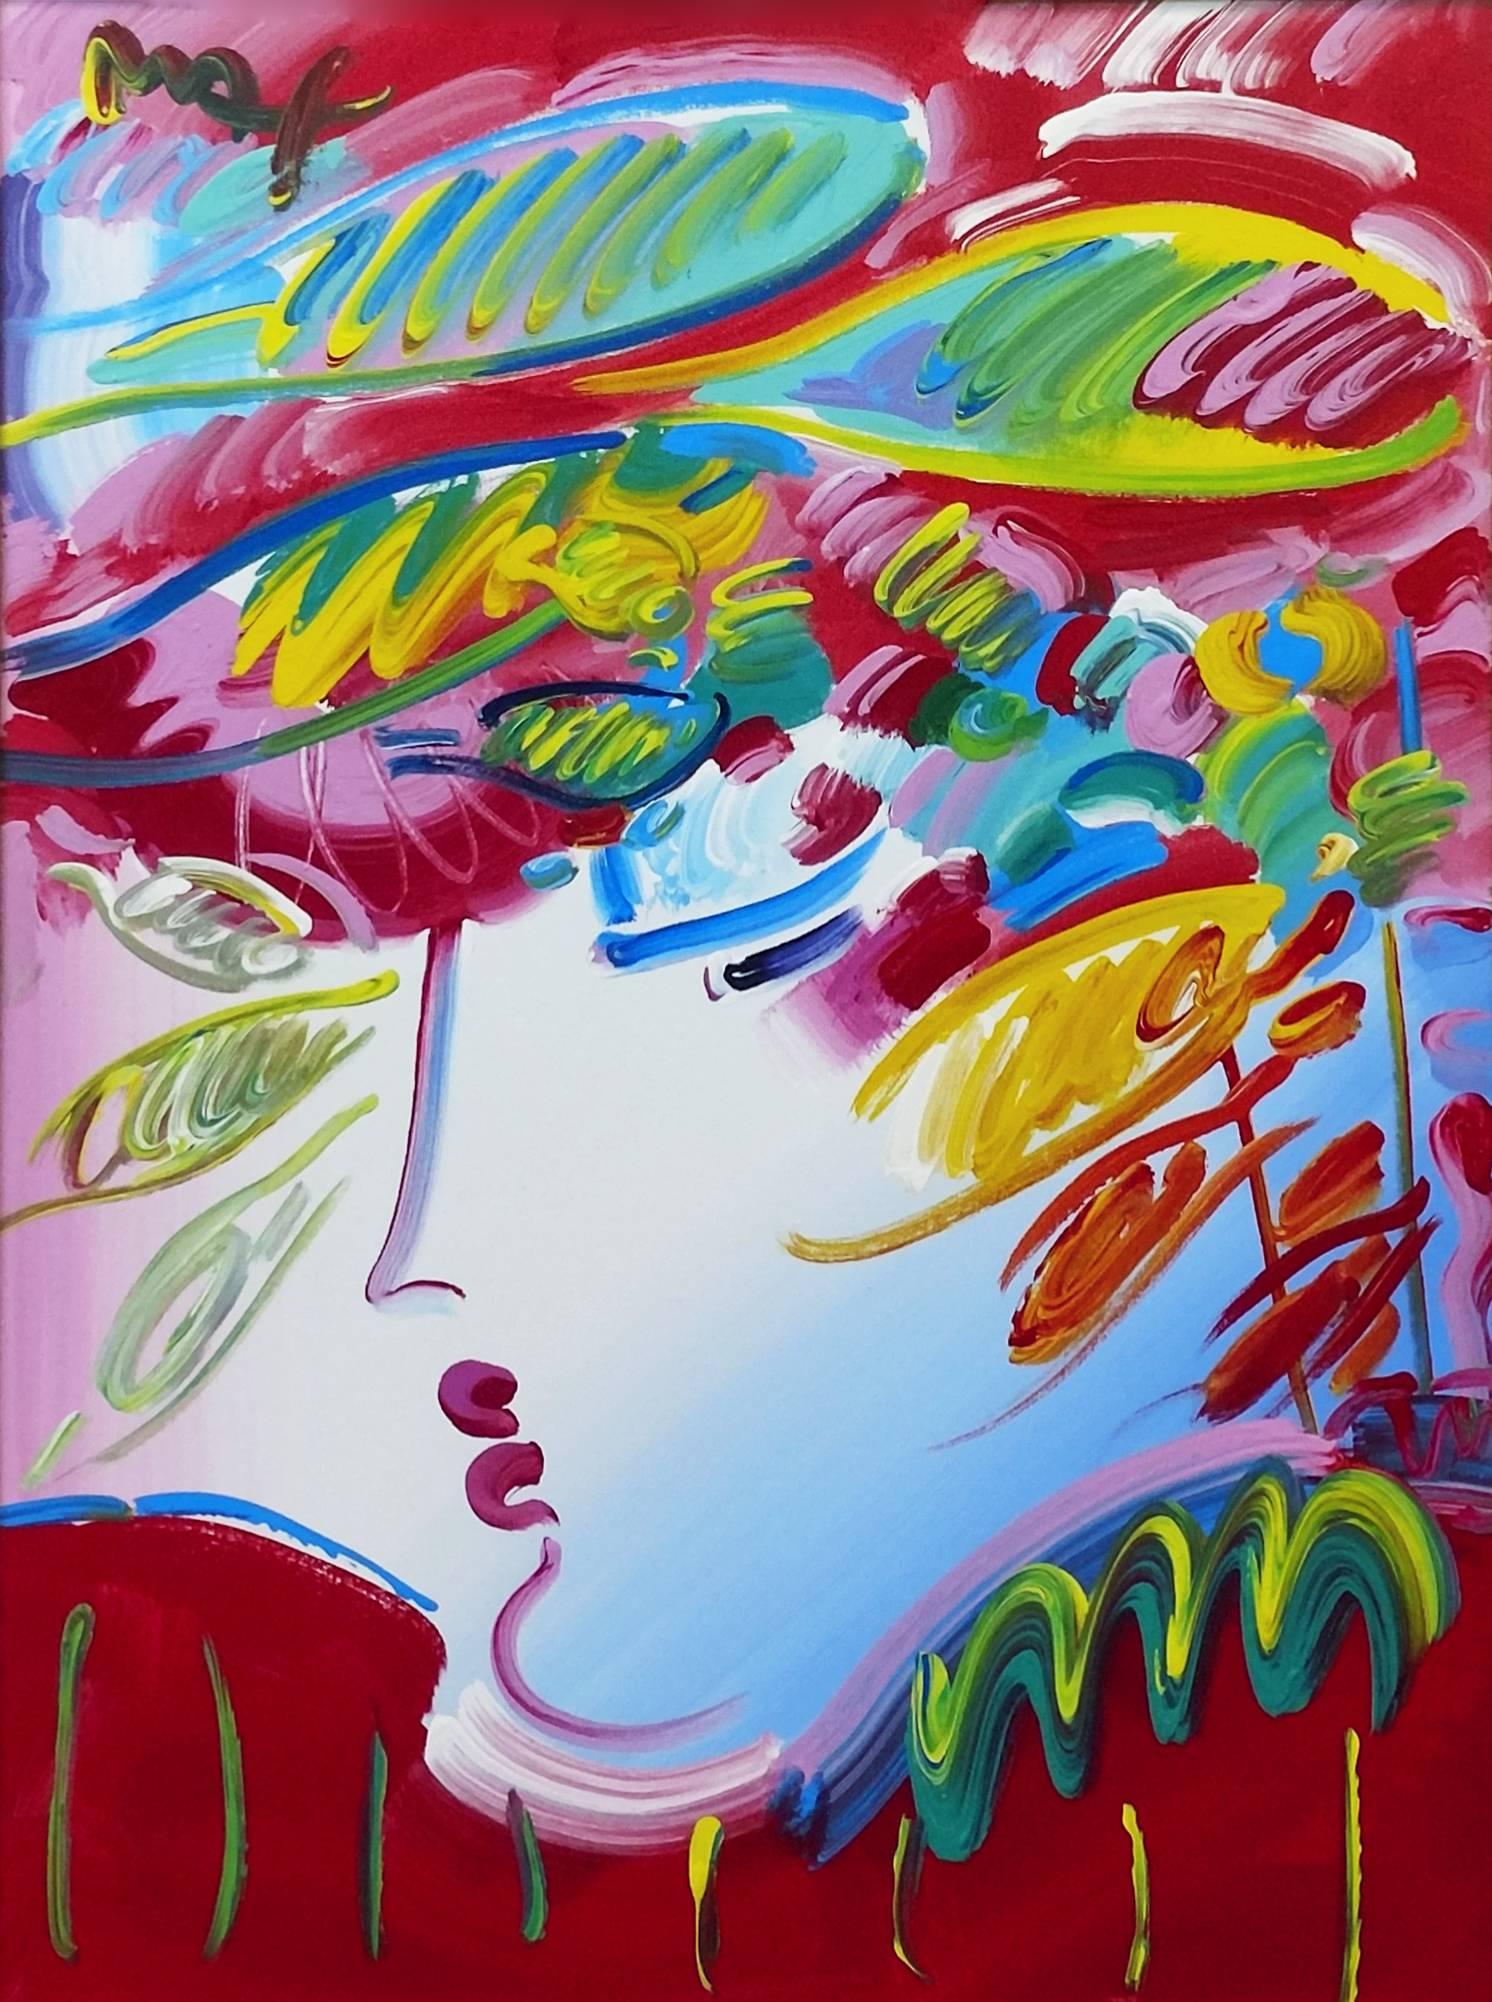 BLUSHING BEAUTY - Painting by Peter Max